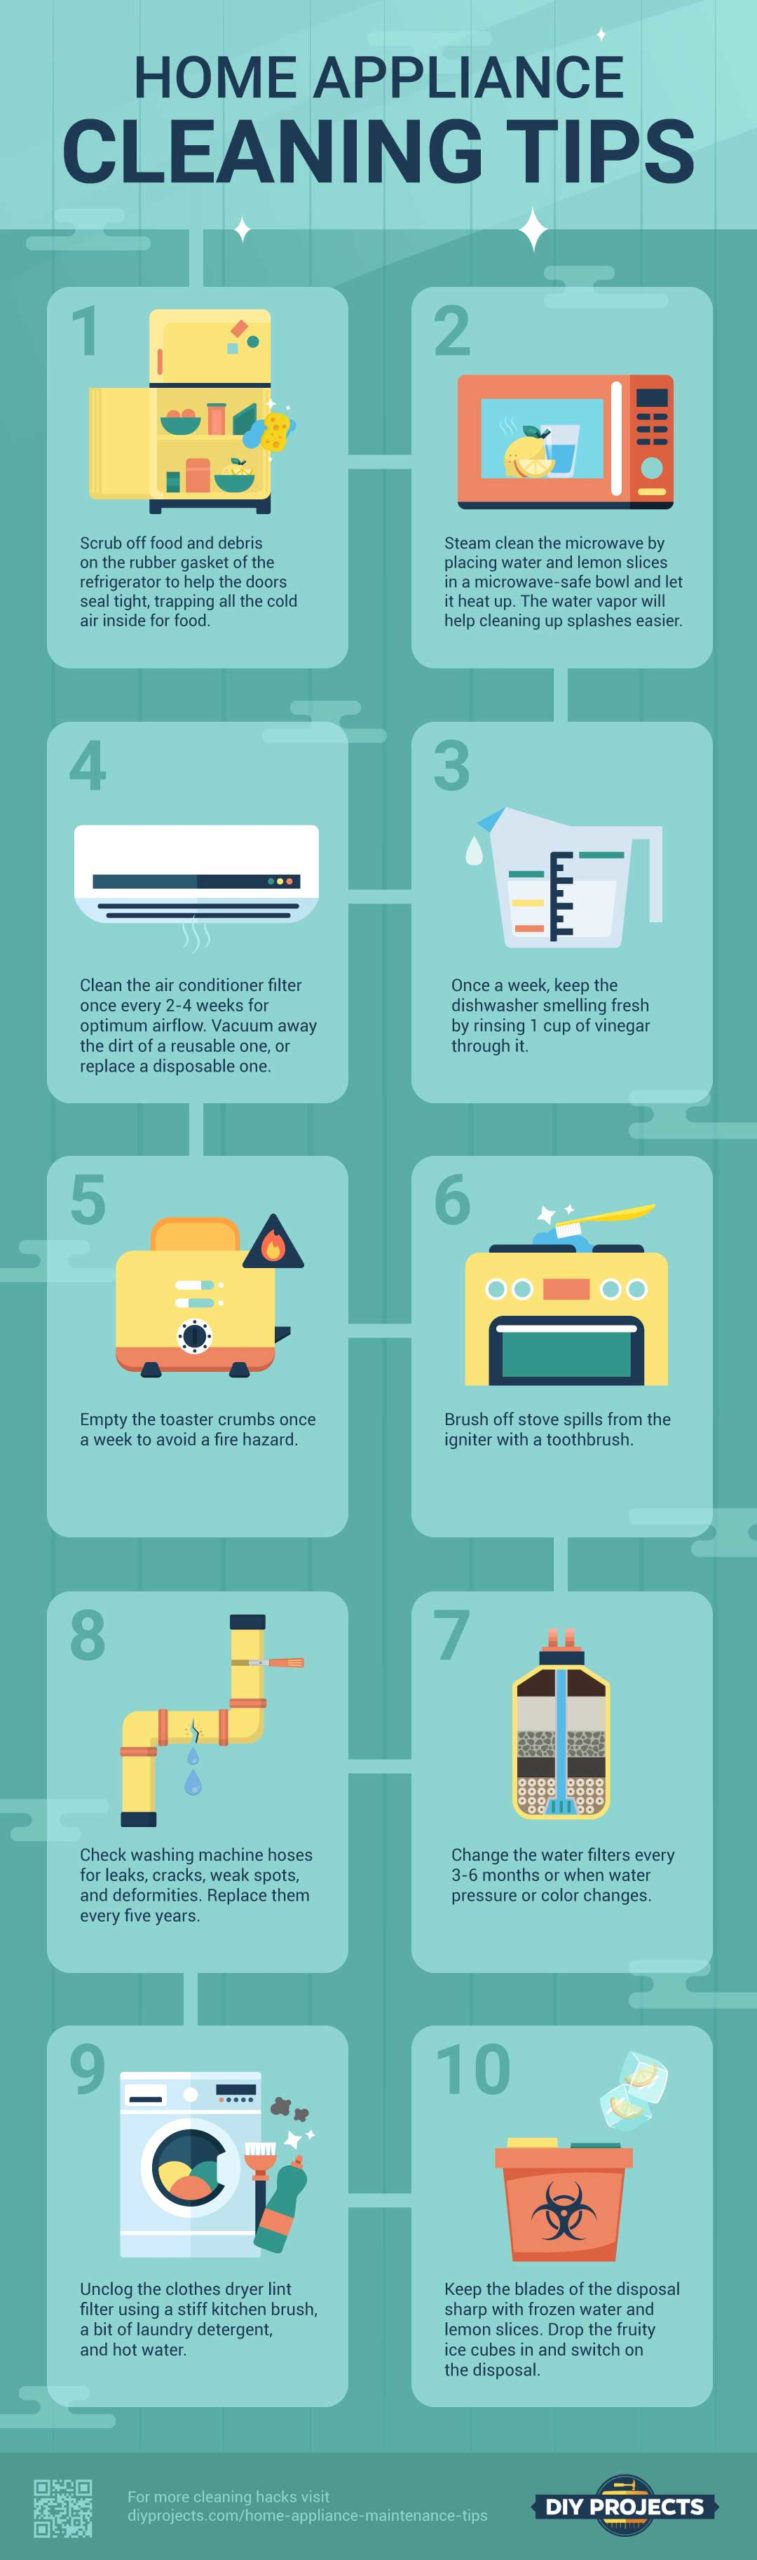 10 Home Appliance Maintenance and Cleaning Tips (INFOGRAPHIC)